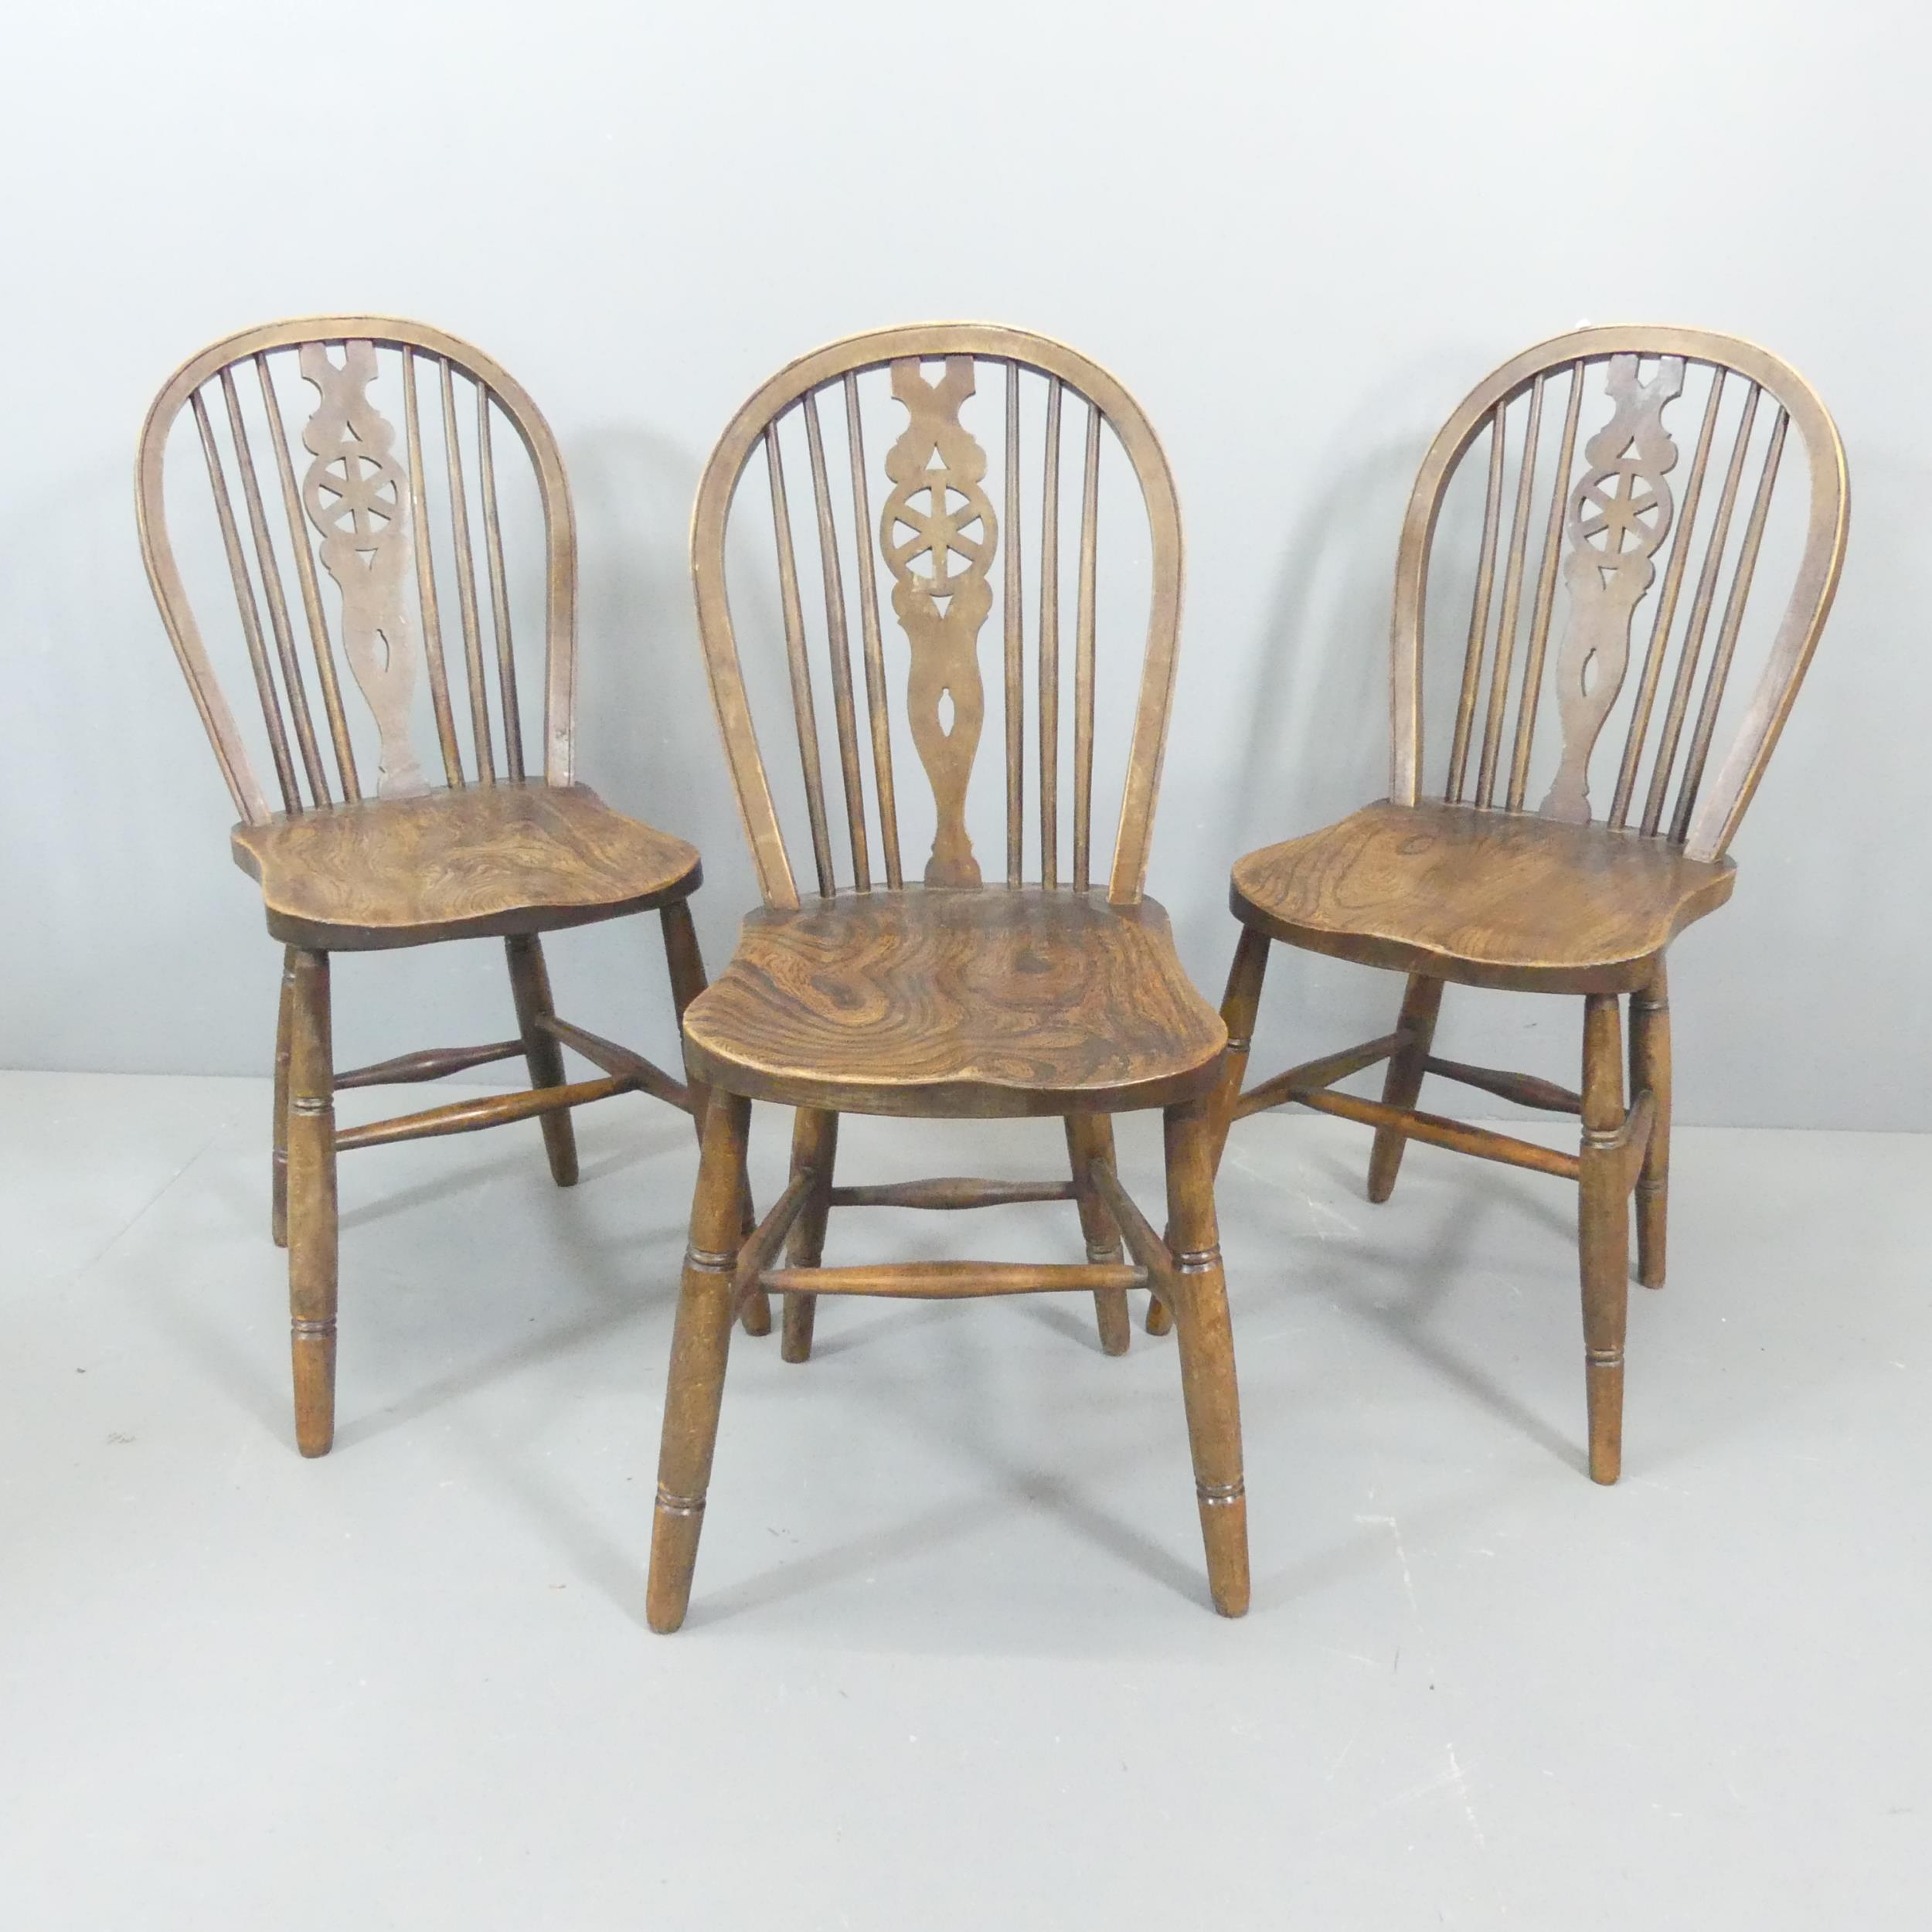 Three 19th century elm-seated wheel back dining chairs. Good condition, with some signs of age and